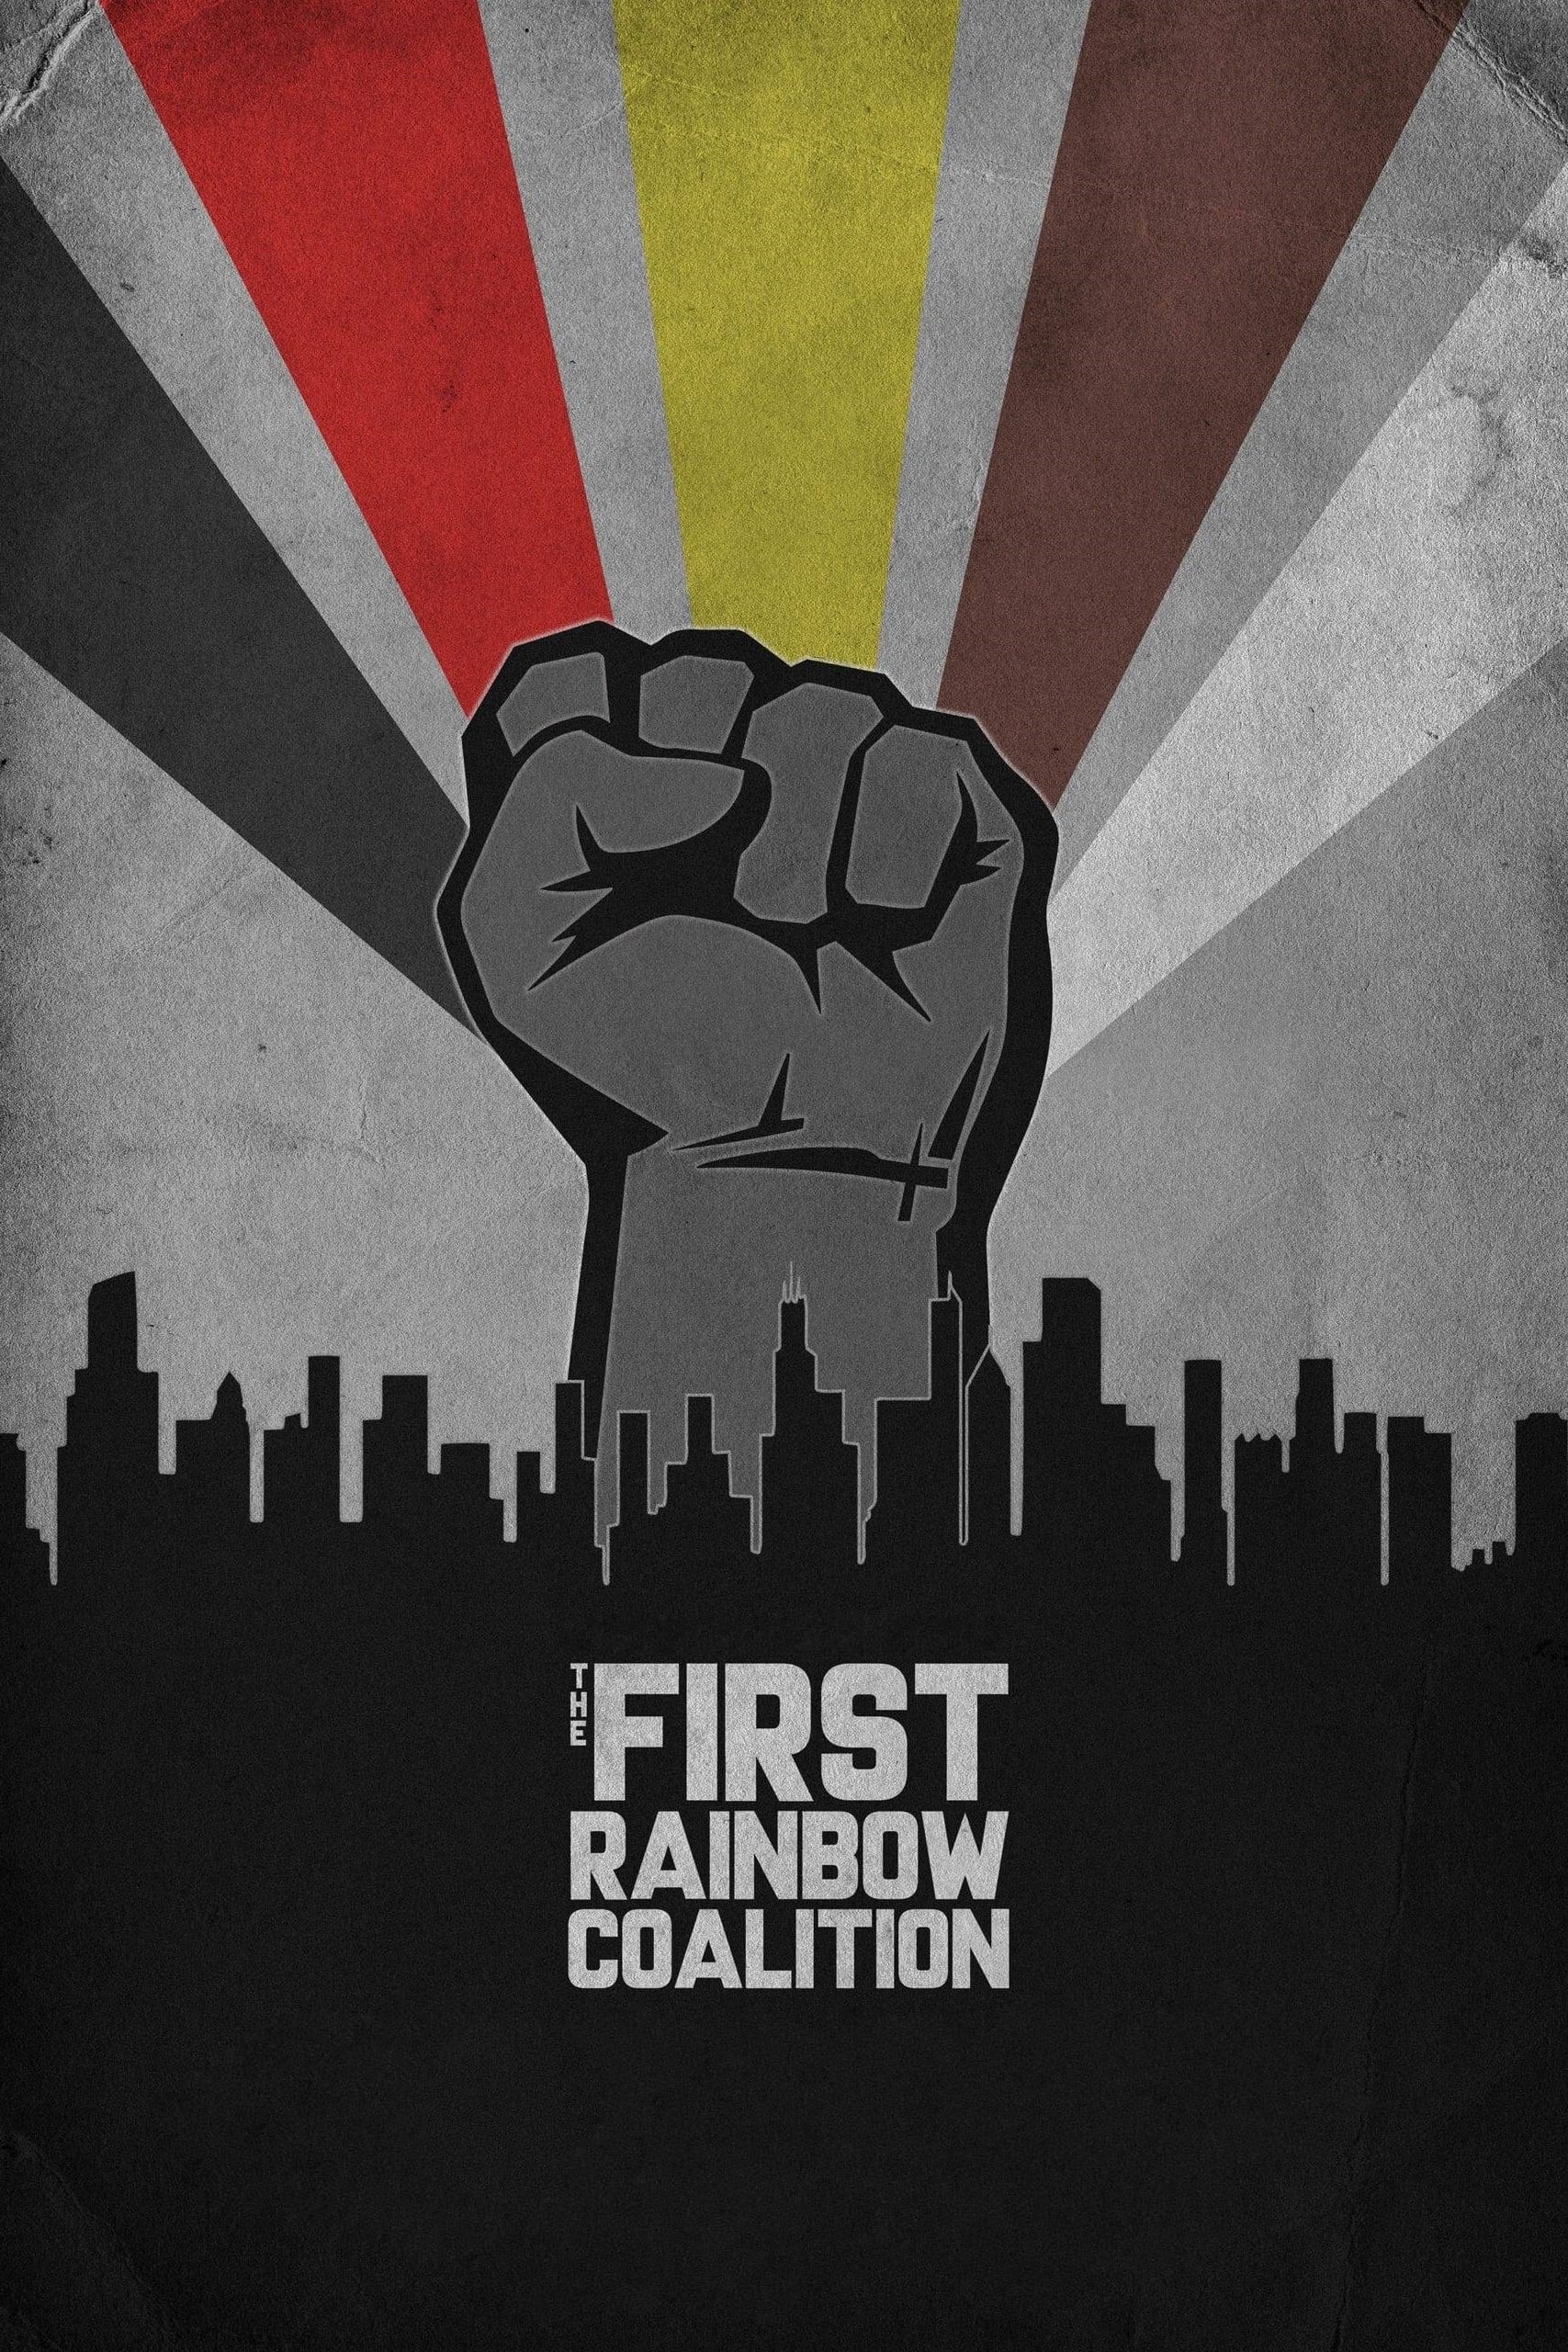 The First Rainbow Coalition